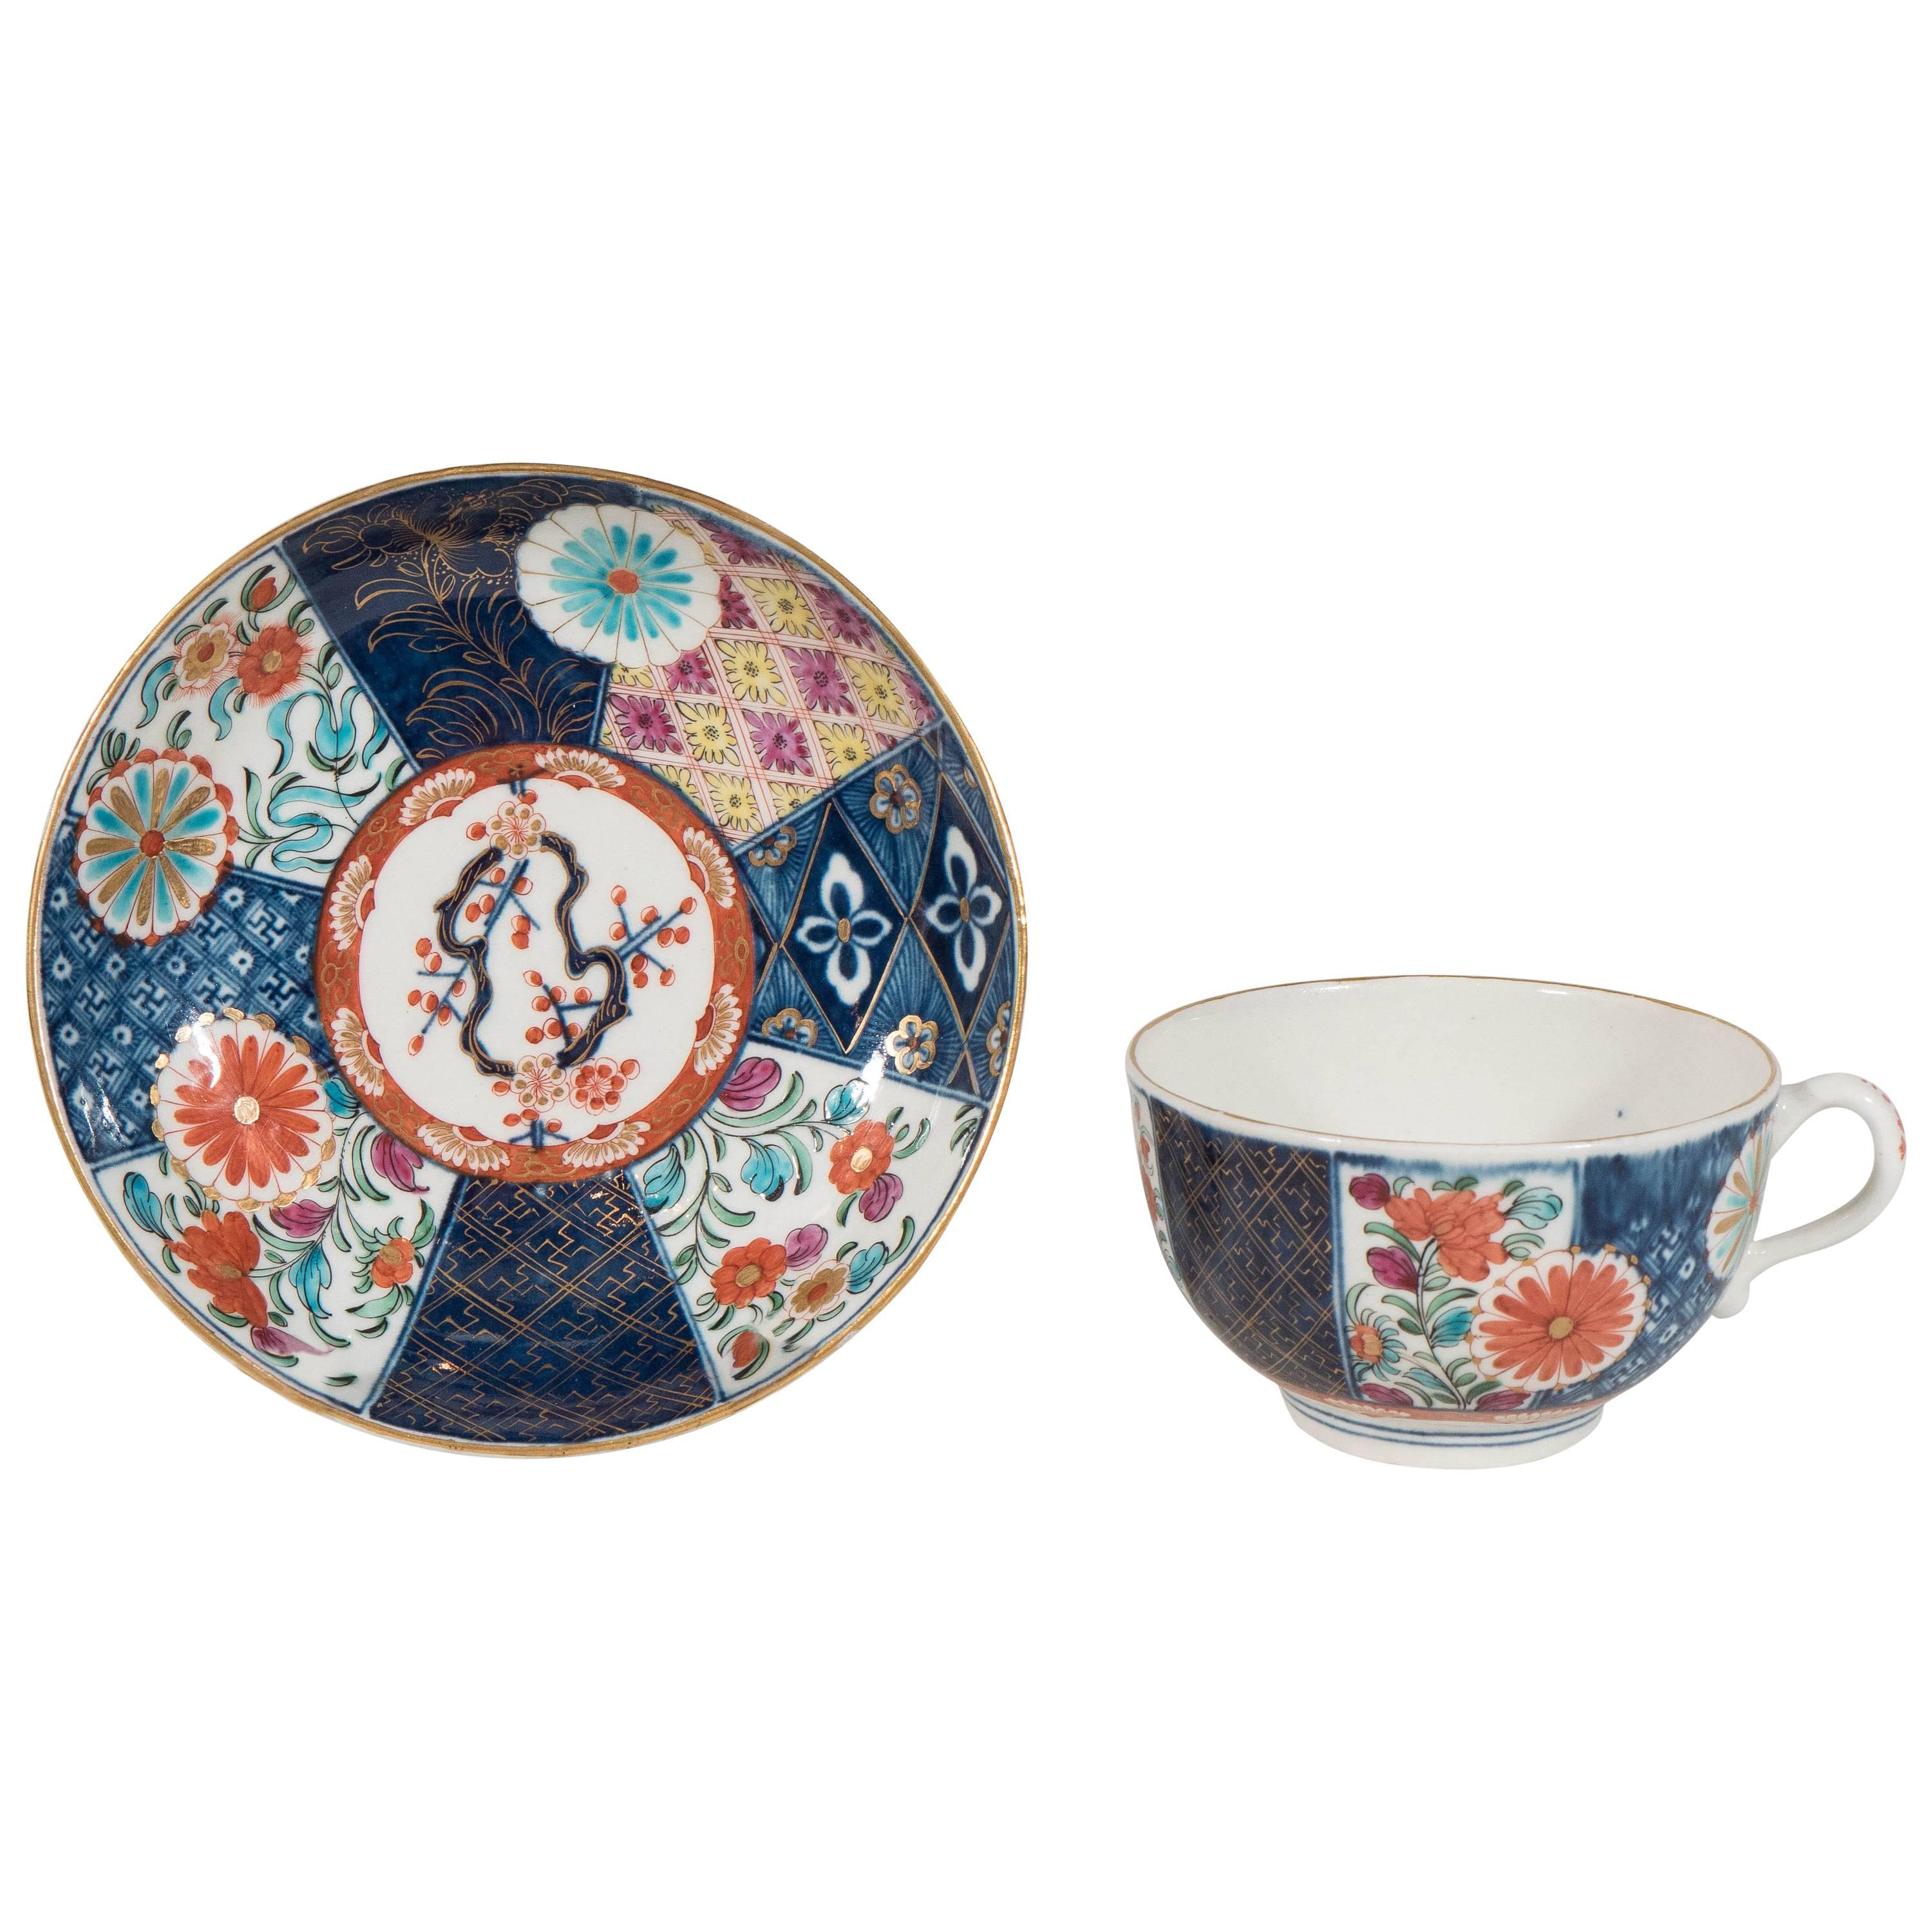 Dr. Wall Worcester Porcelain Cup and Saucer in the "Old Mosaick" Pattern